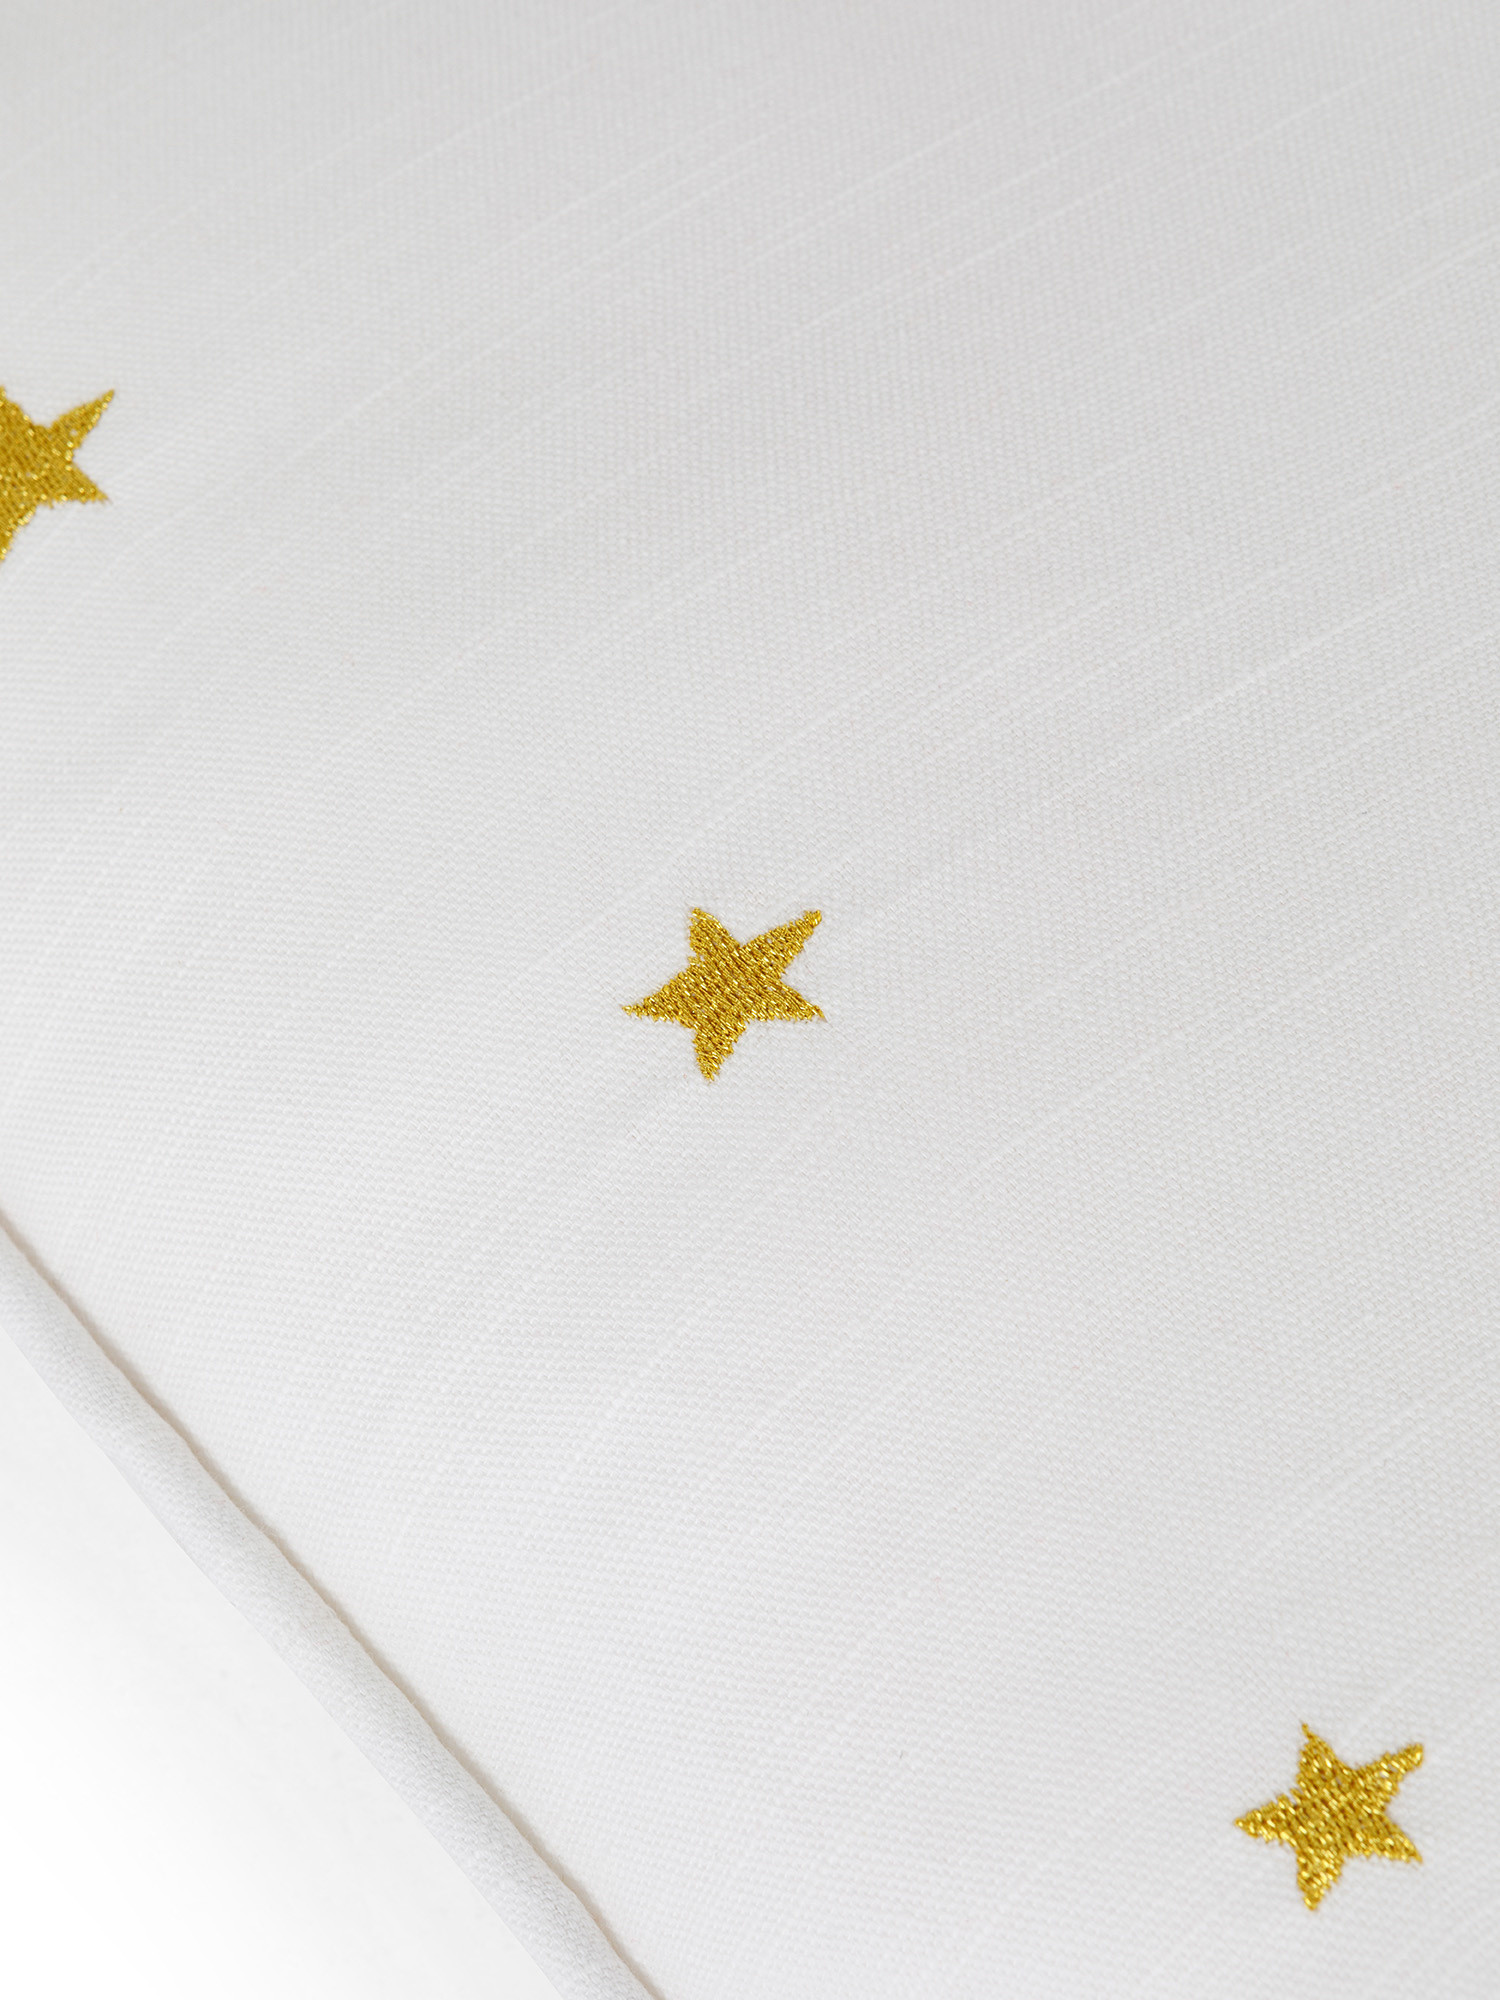 Velvet cushion with stars embroidered in lurex 45x45 cm, Gold, large image number 2